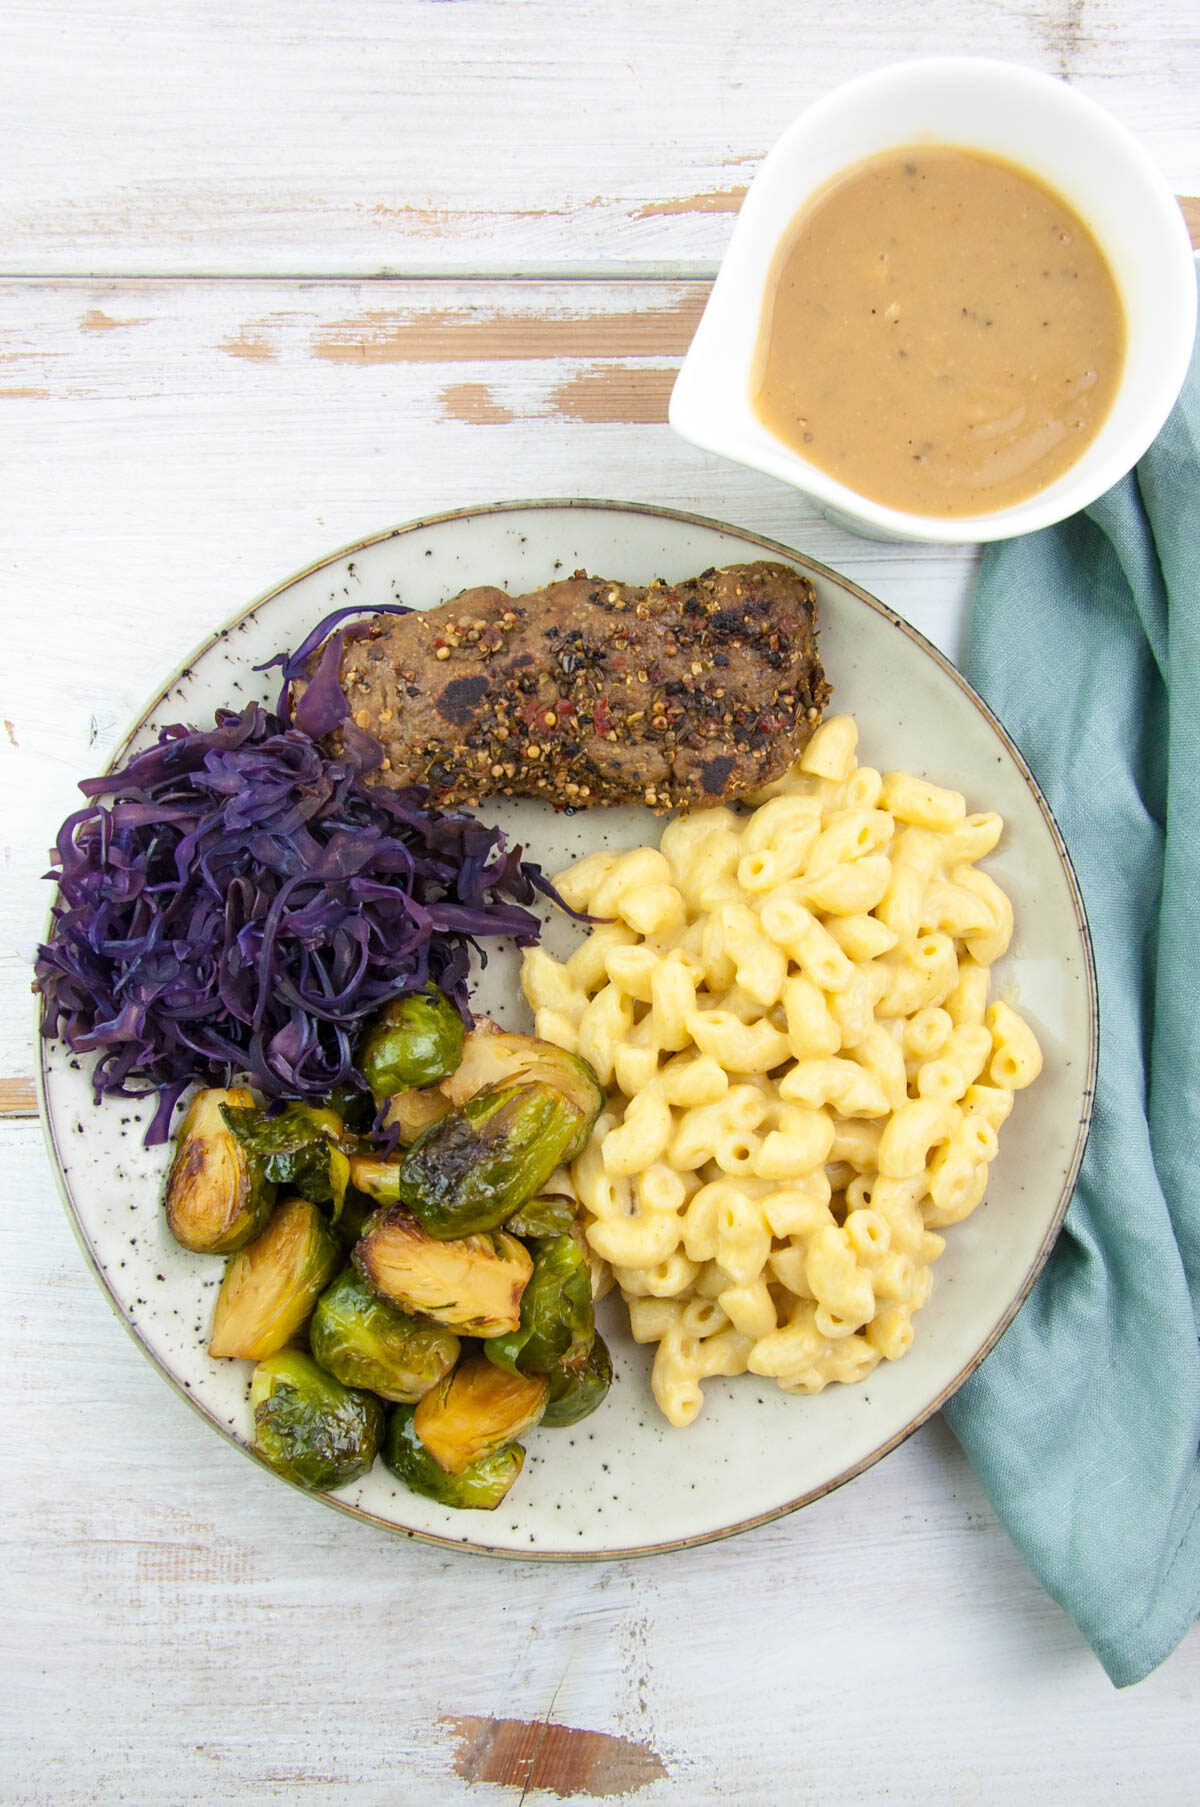 Stovetop Vegan Mac and Cheese with Steak, Brussels sprouts, red cabbage, peppercorn sauce